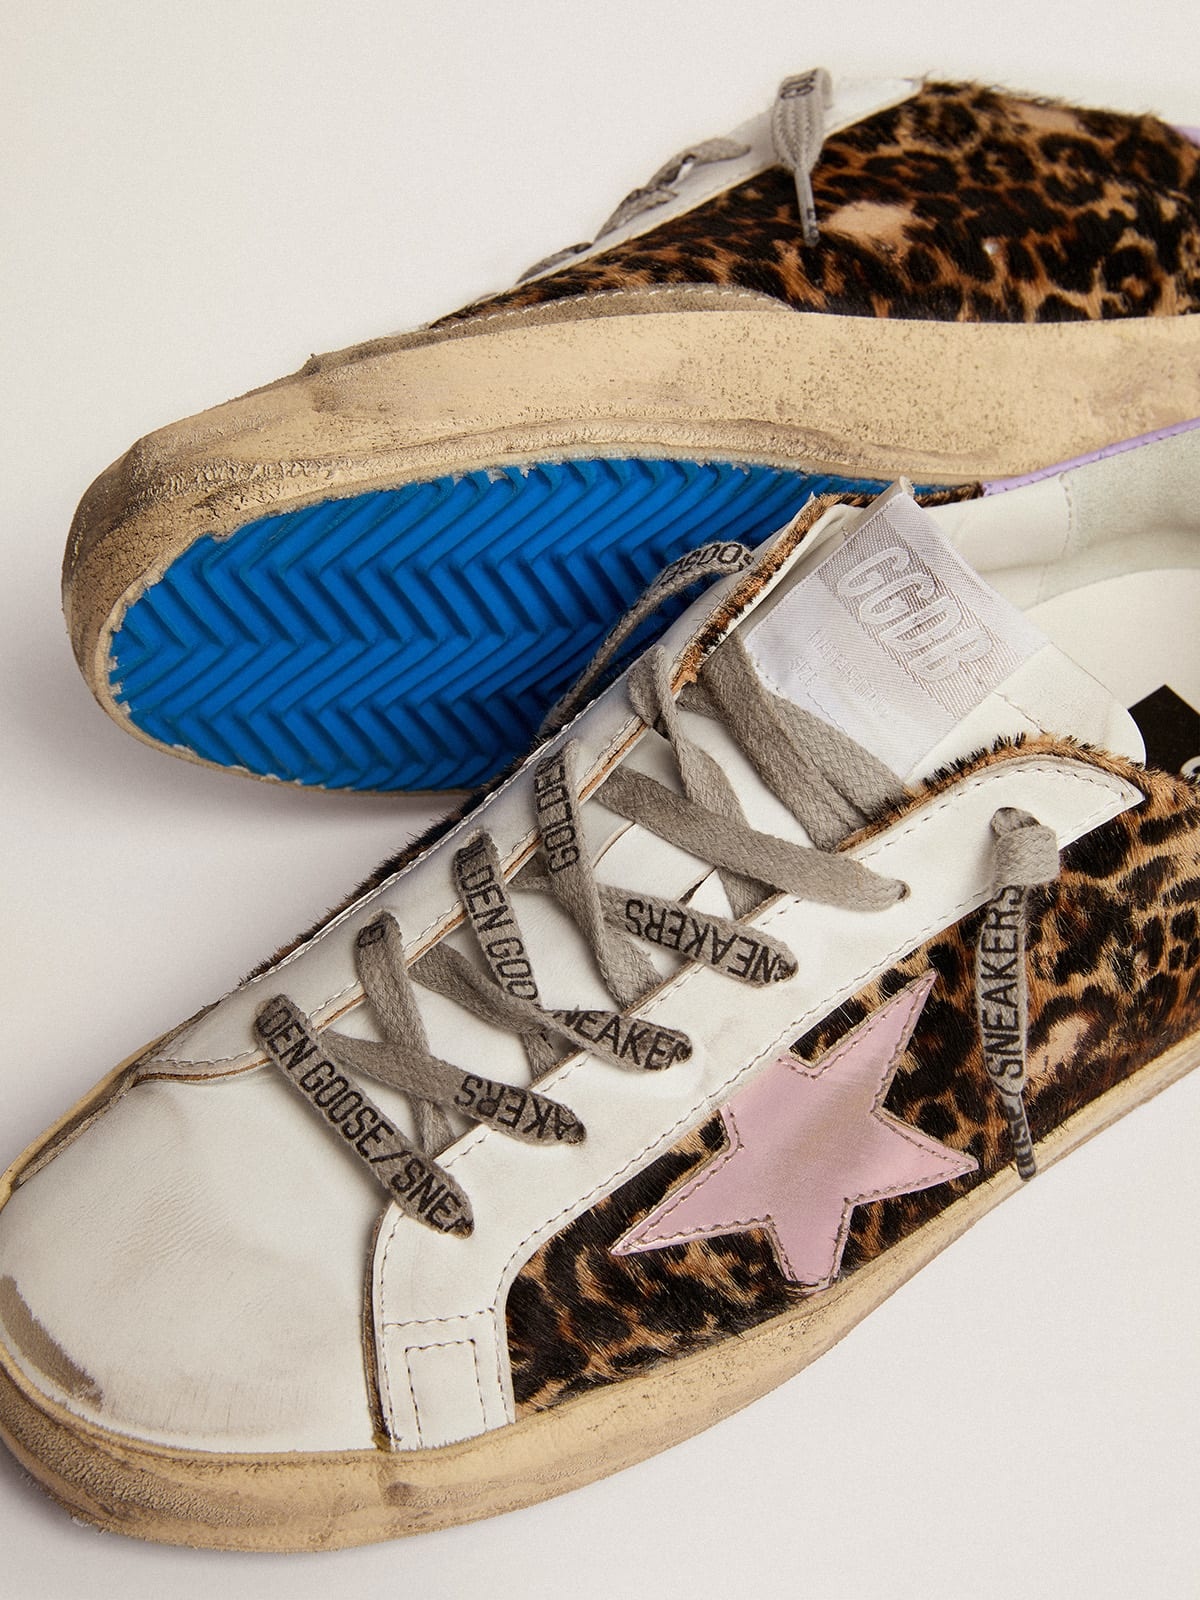 Super-Star LTD sneakers in leopard-print pony skin with salmon-colored laminated leather star and pu - 4